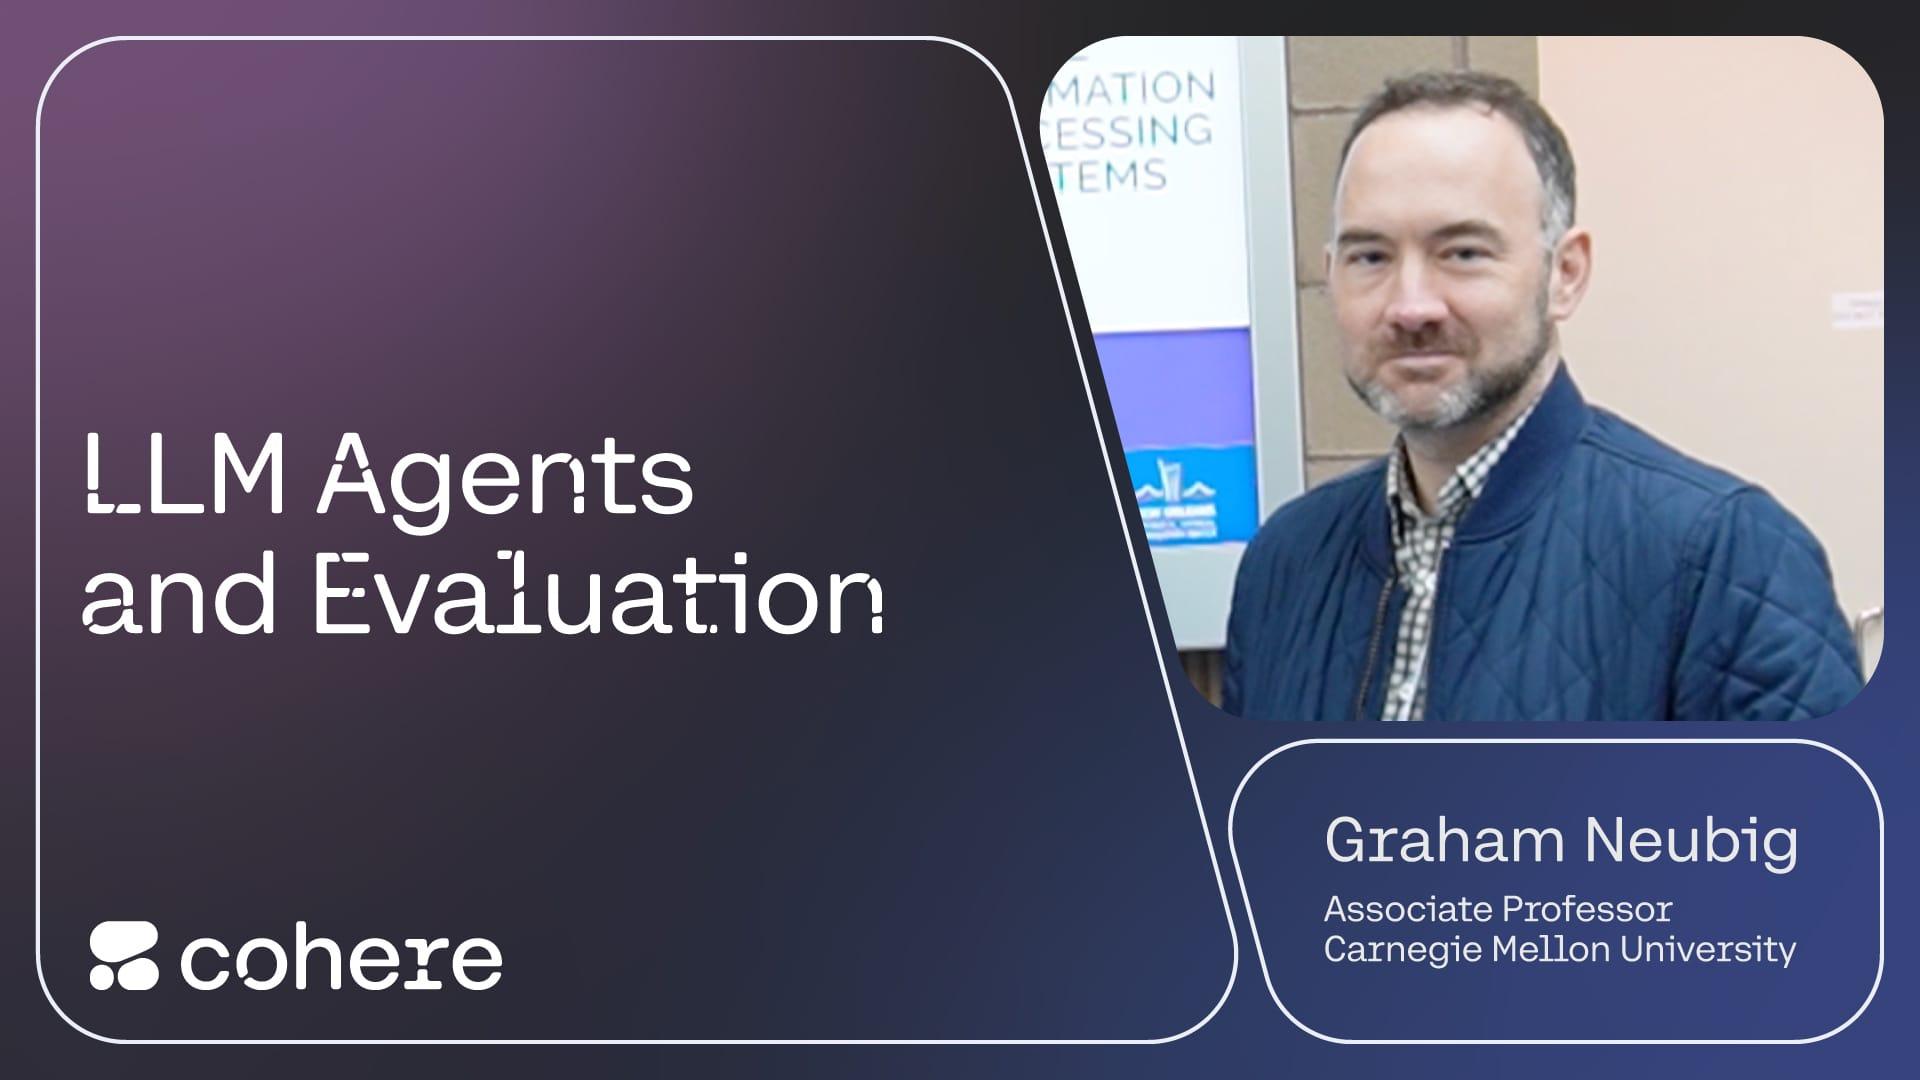 LLM Agents and Evaluation: An Interview With Graham Neubig